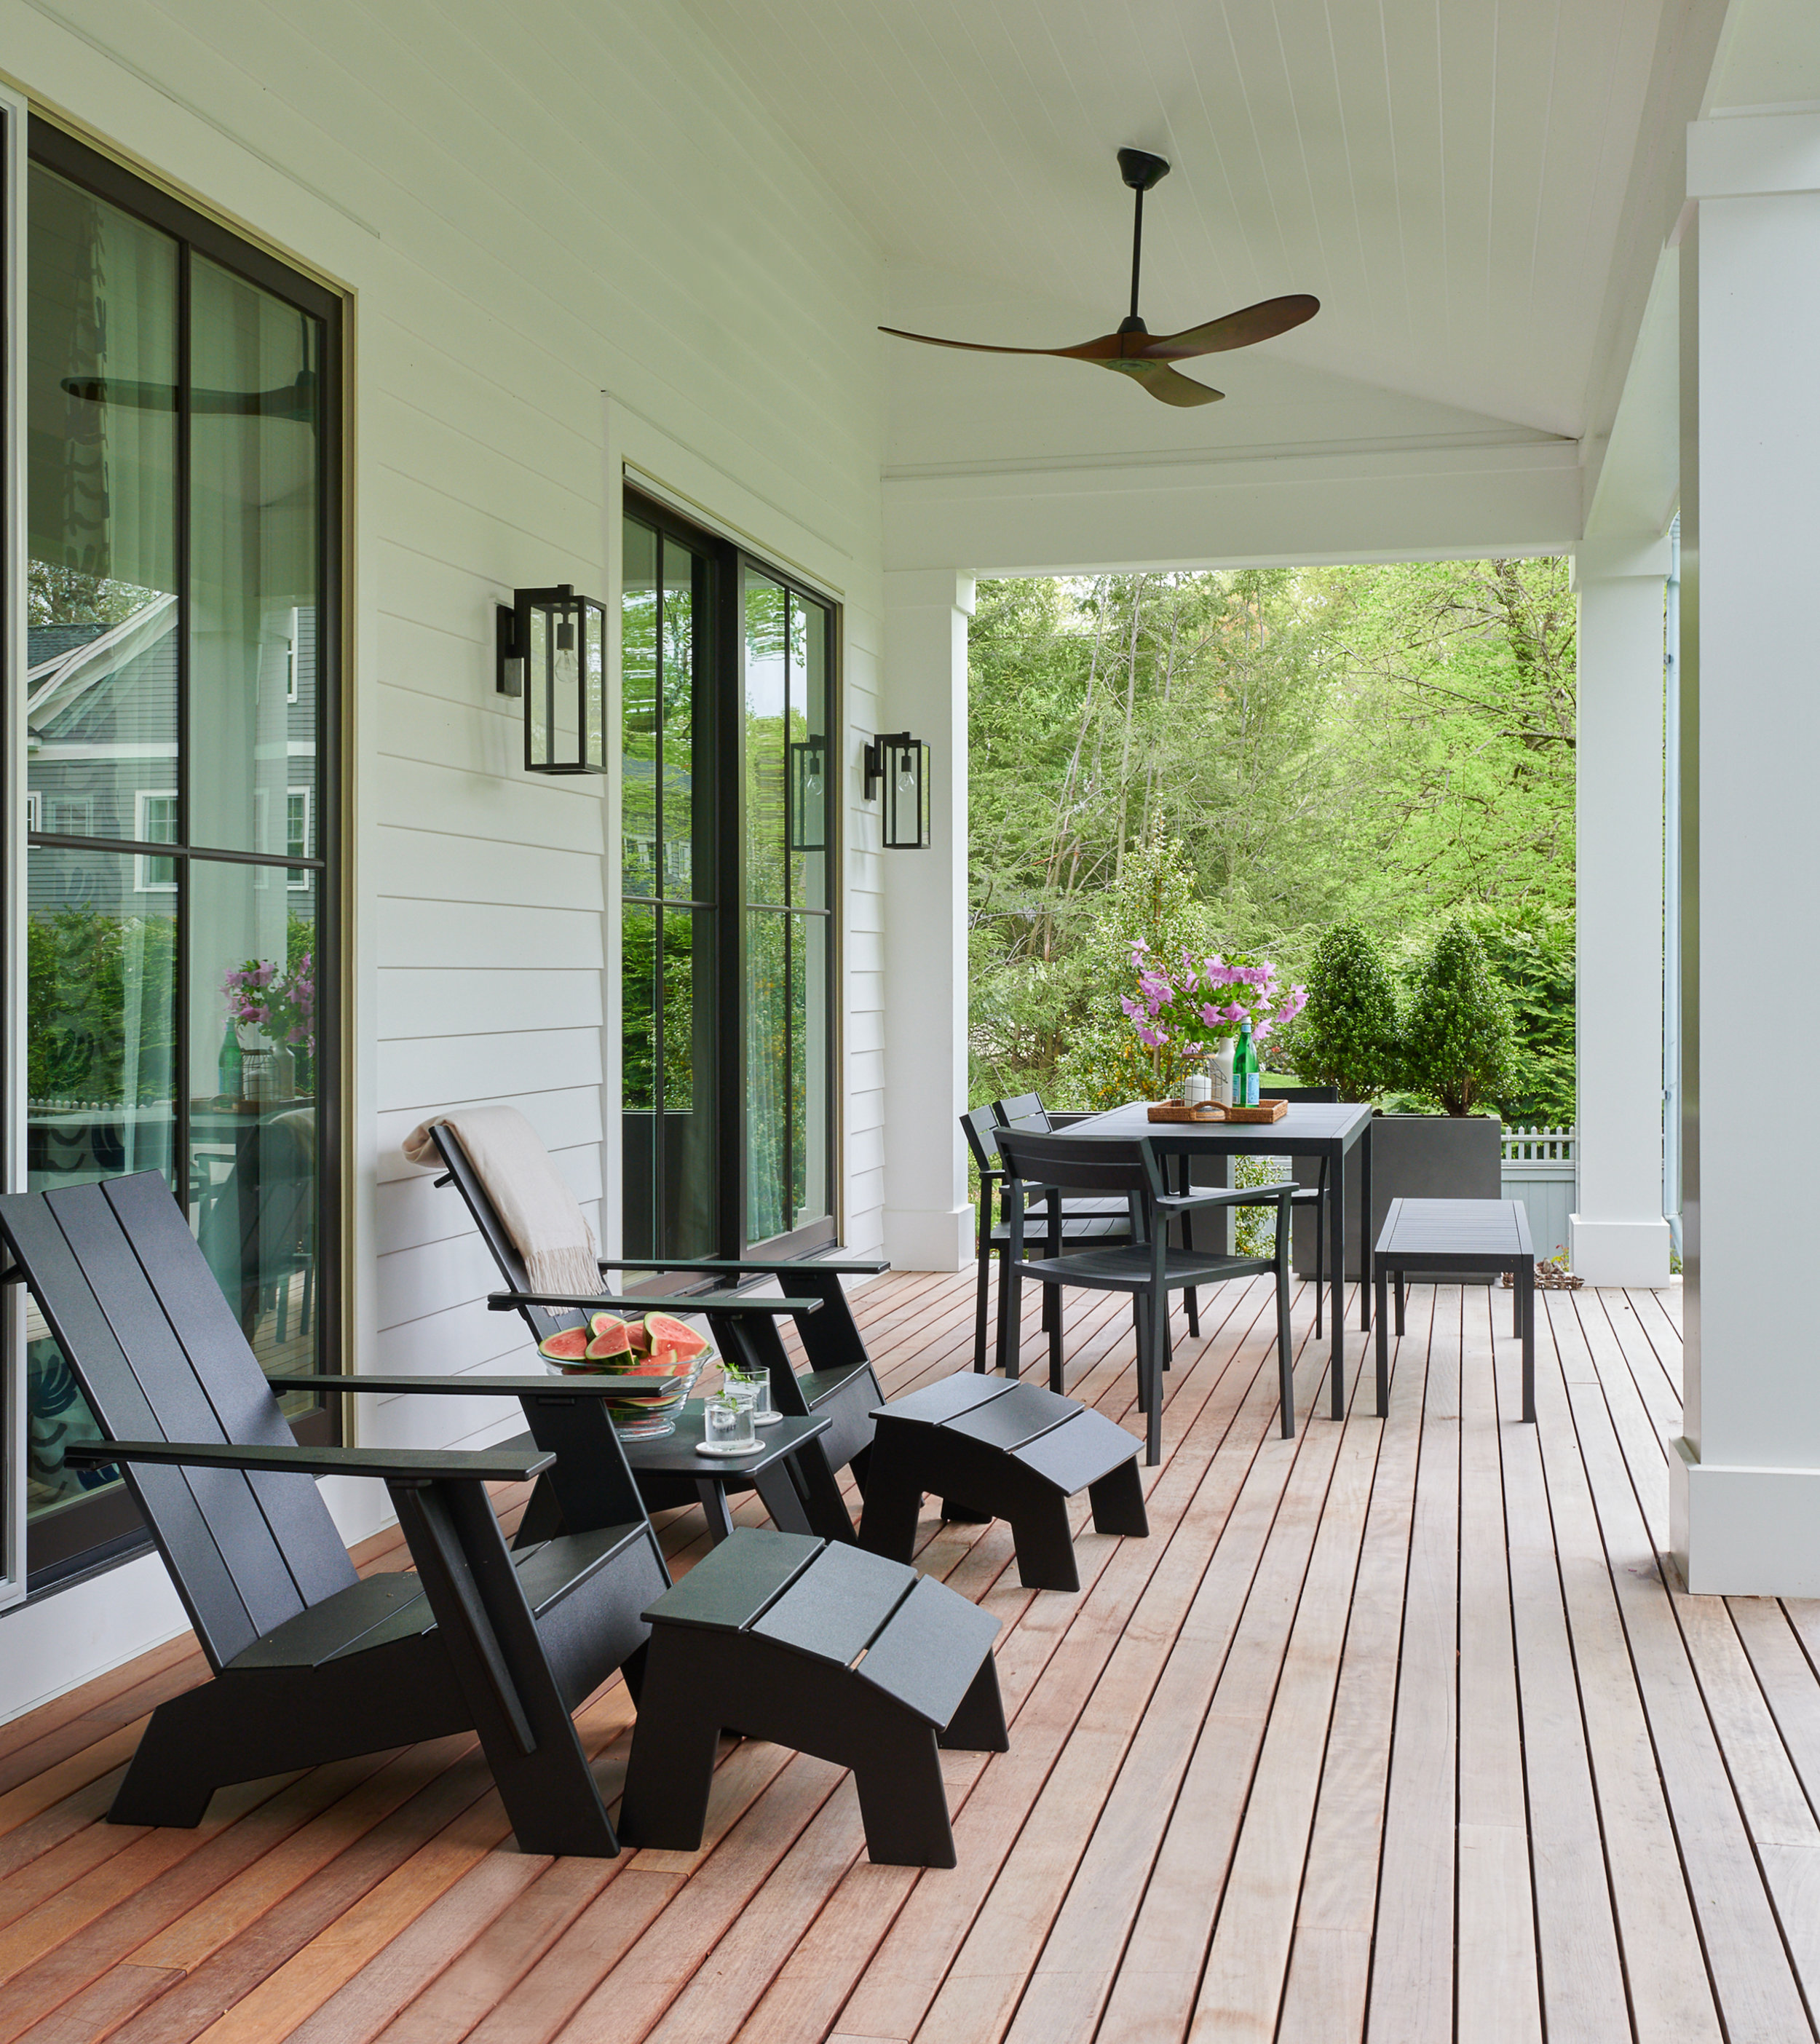 Porch_16 Orchard-New Canaan-CT.jpg